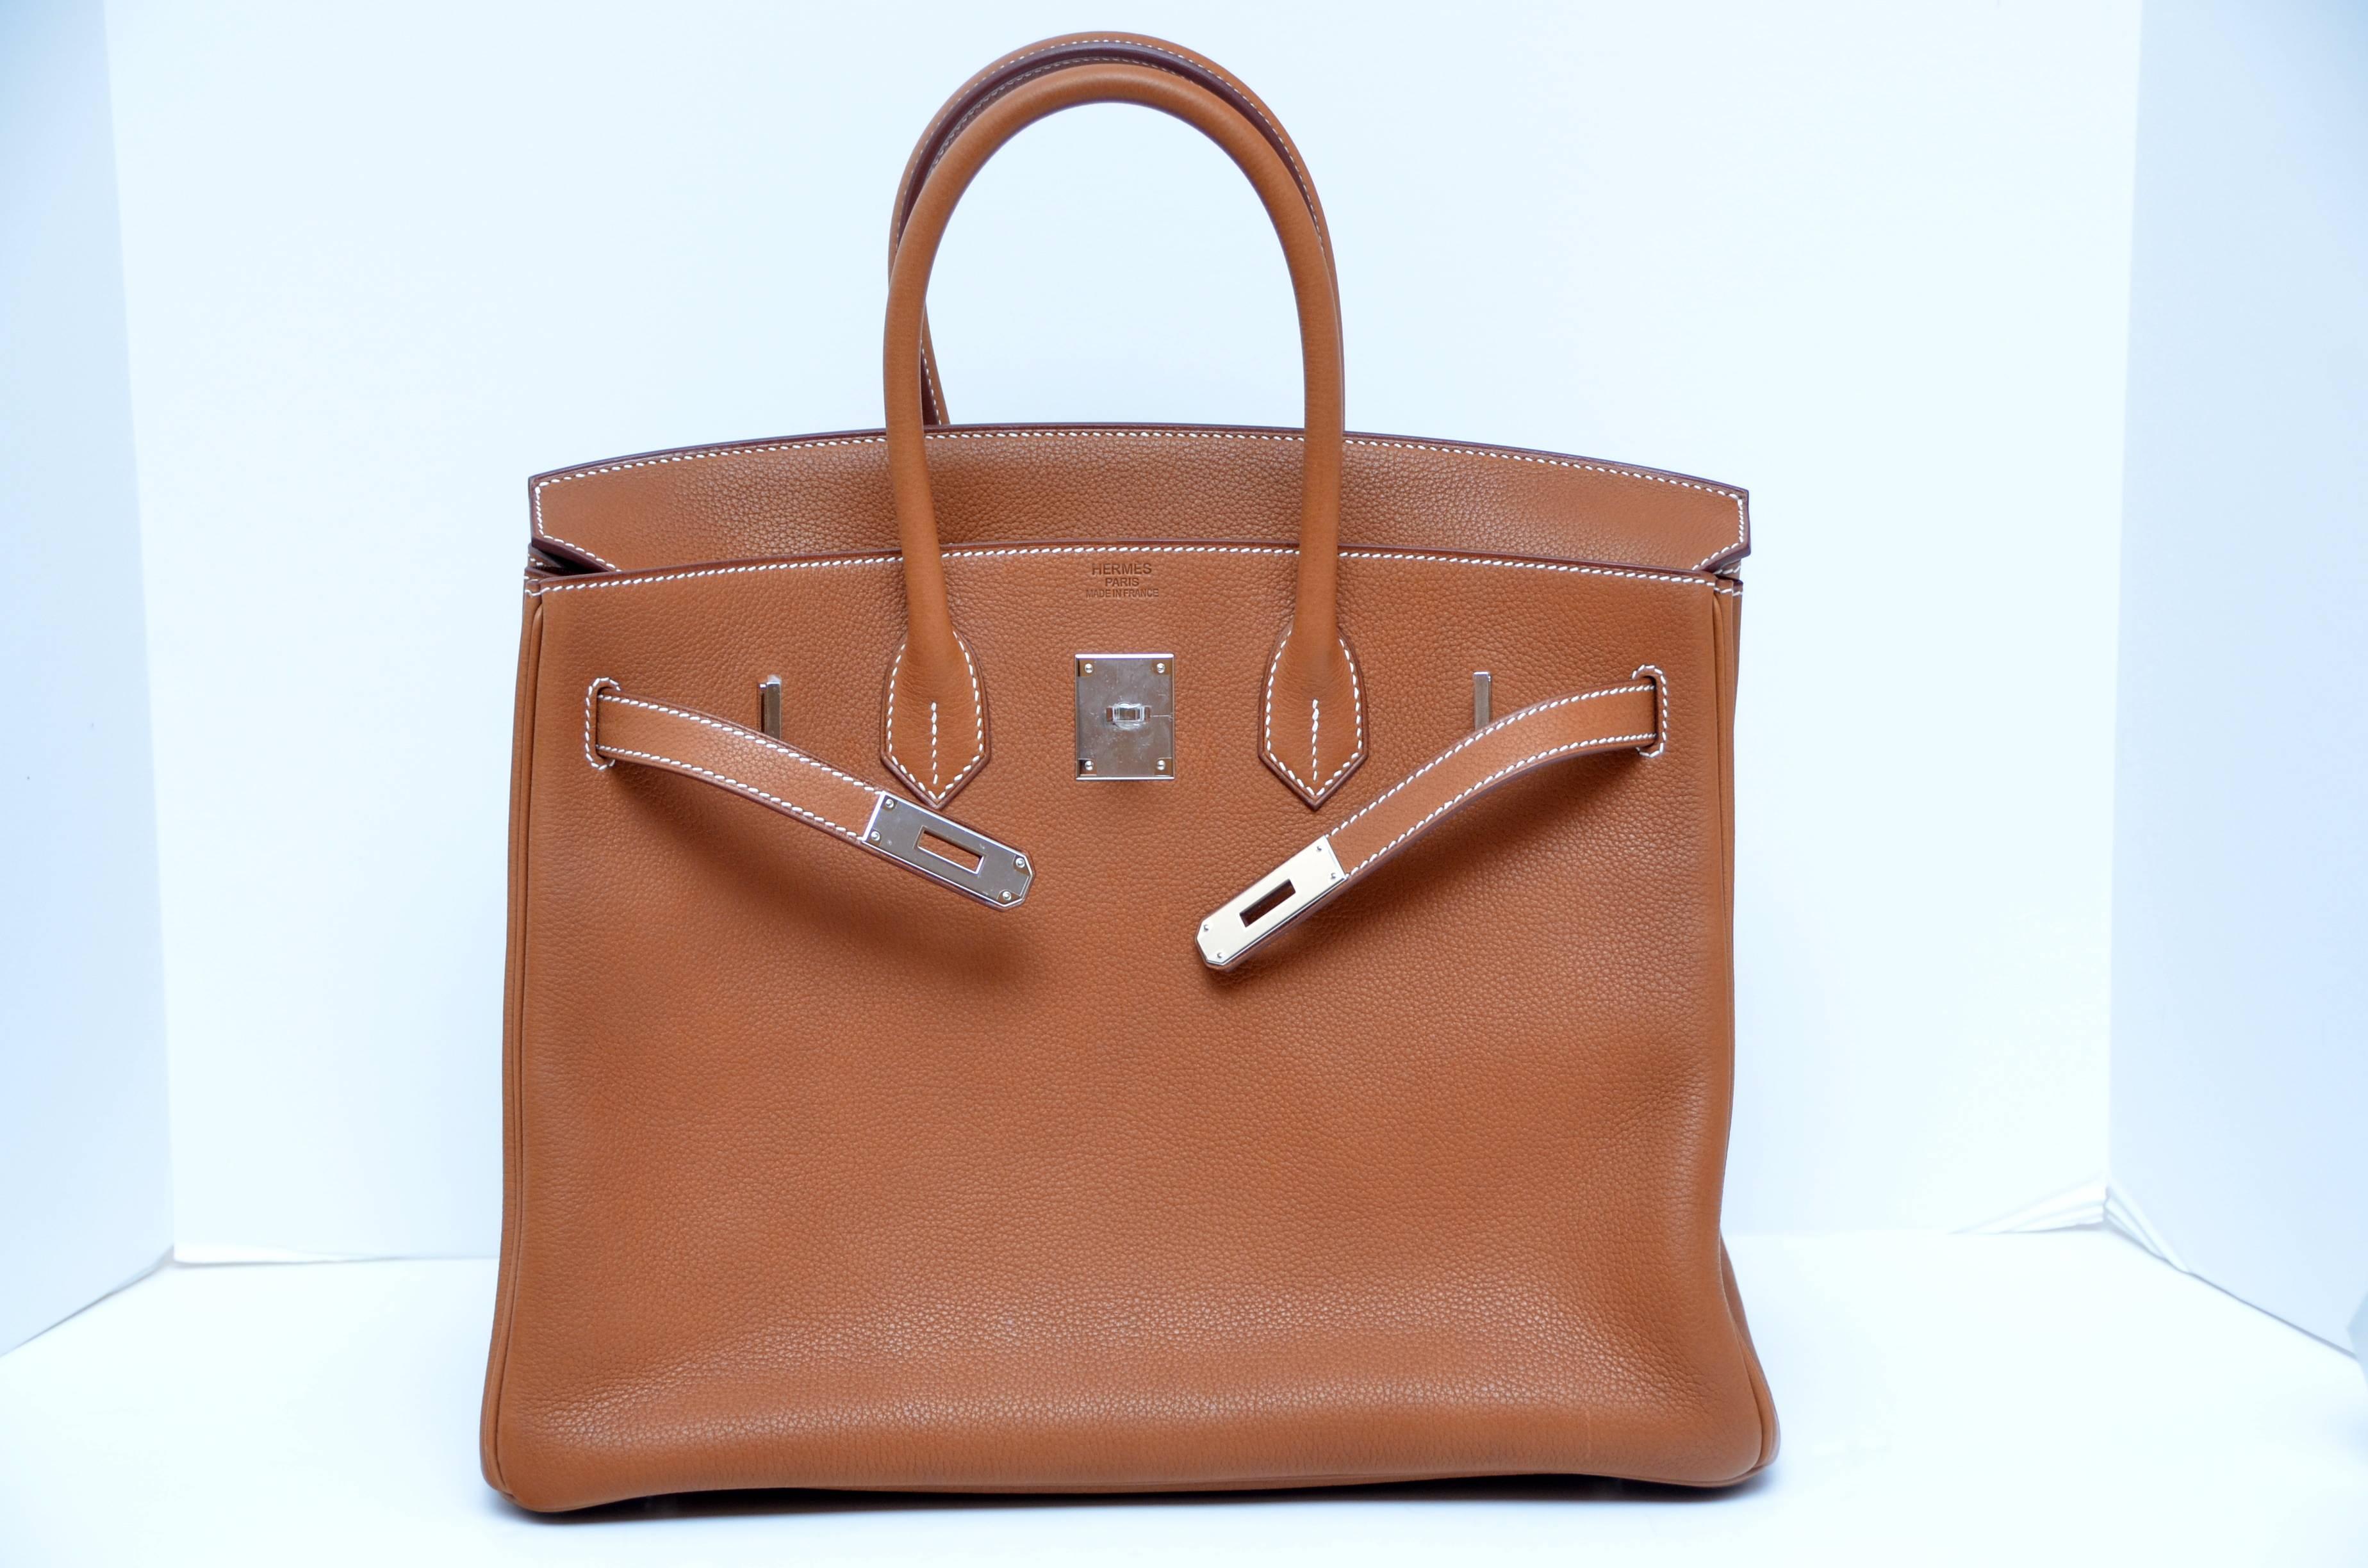 
Guaranteed Authentic highly sought after Hermes 35 Birkin very rare Barenia Faubourg. 
Finish and texture on Barenia requires a highly specialized oiling process by Hermes and because of this unique special leather price is higher that some other